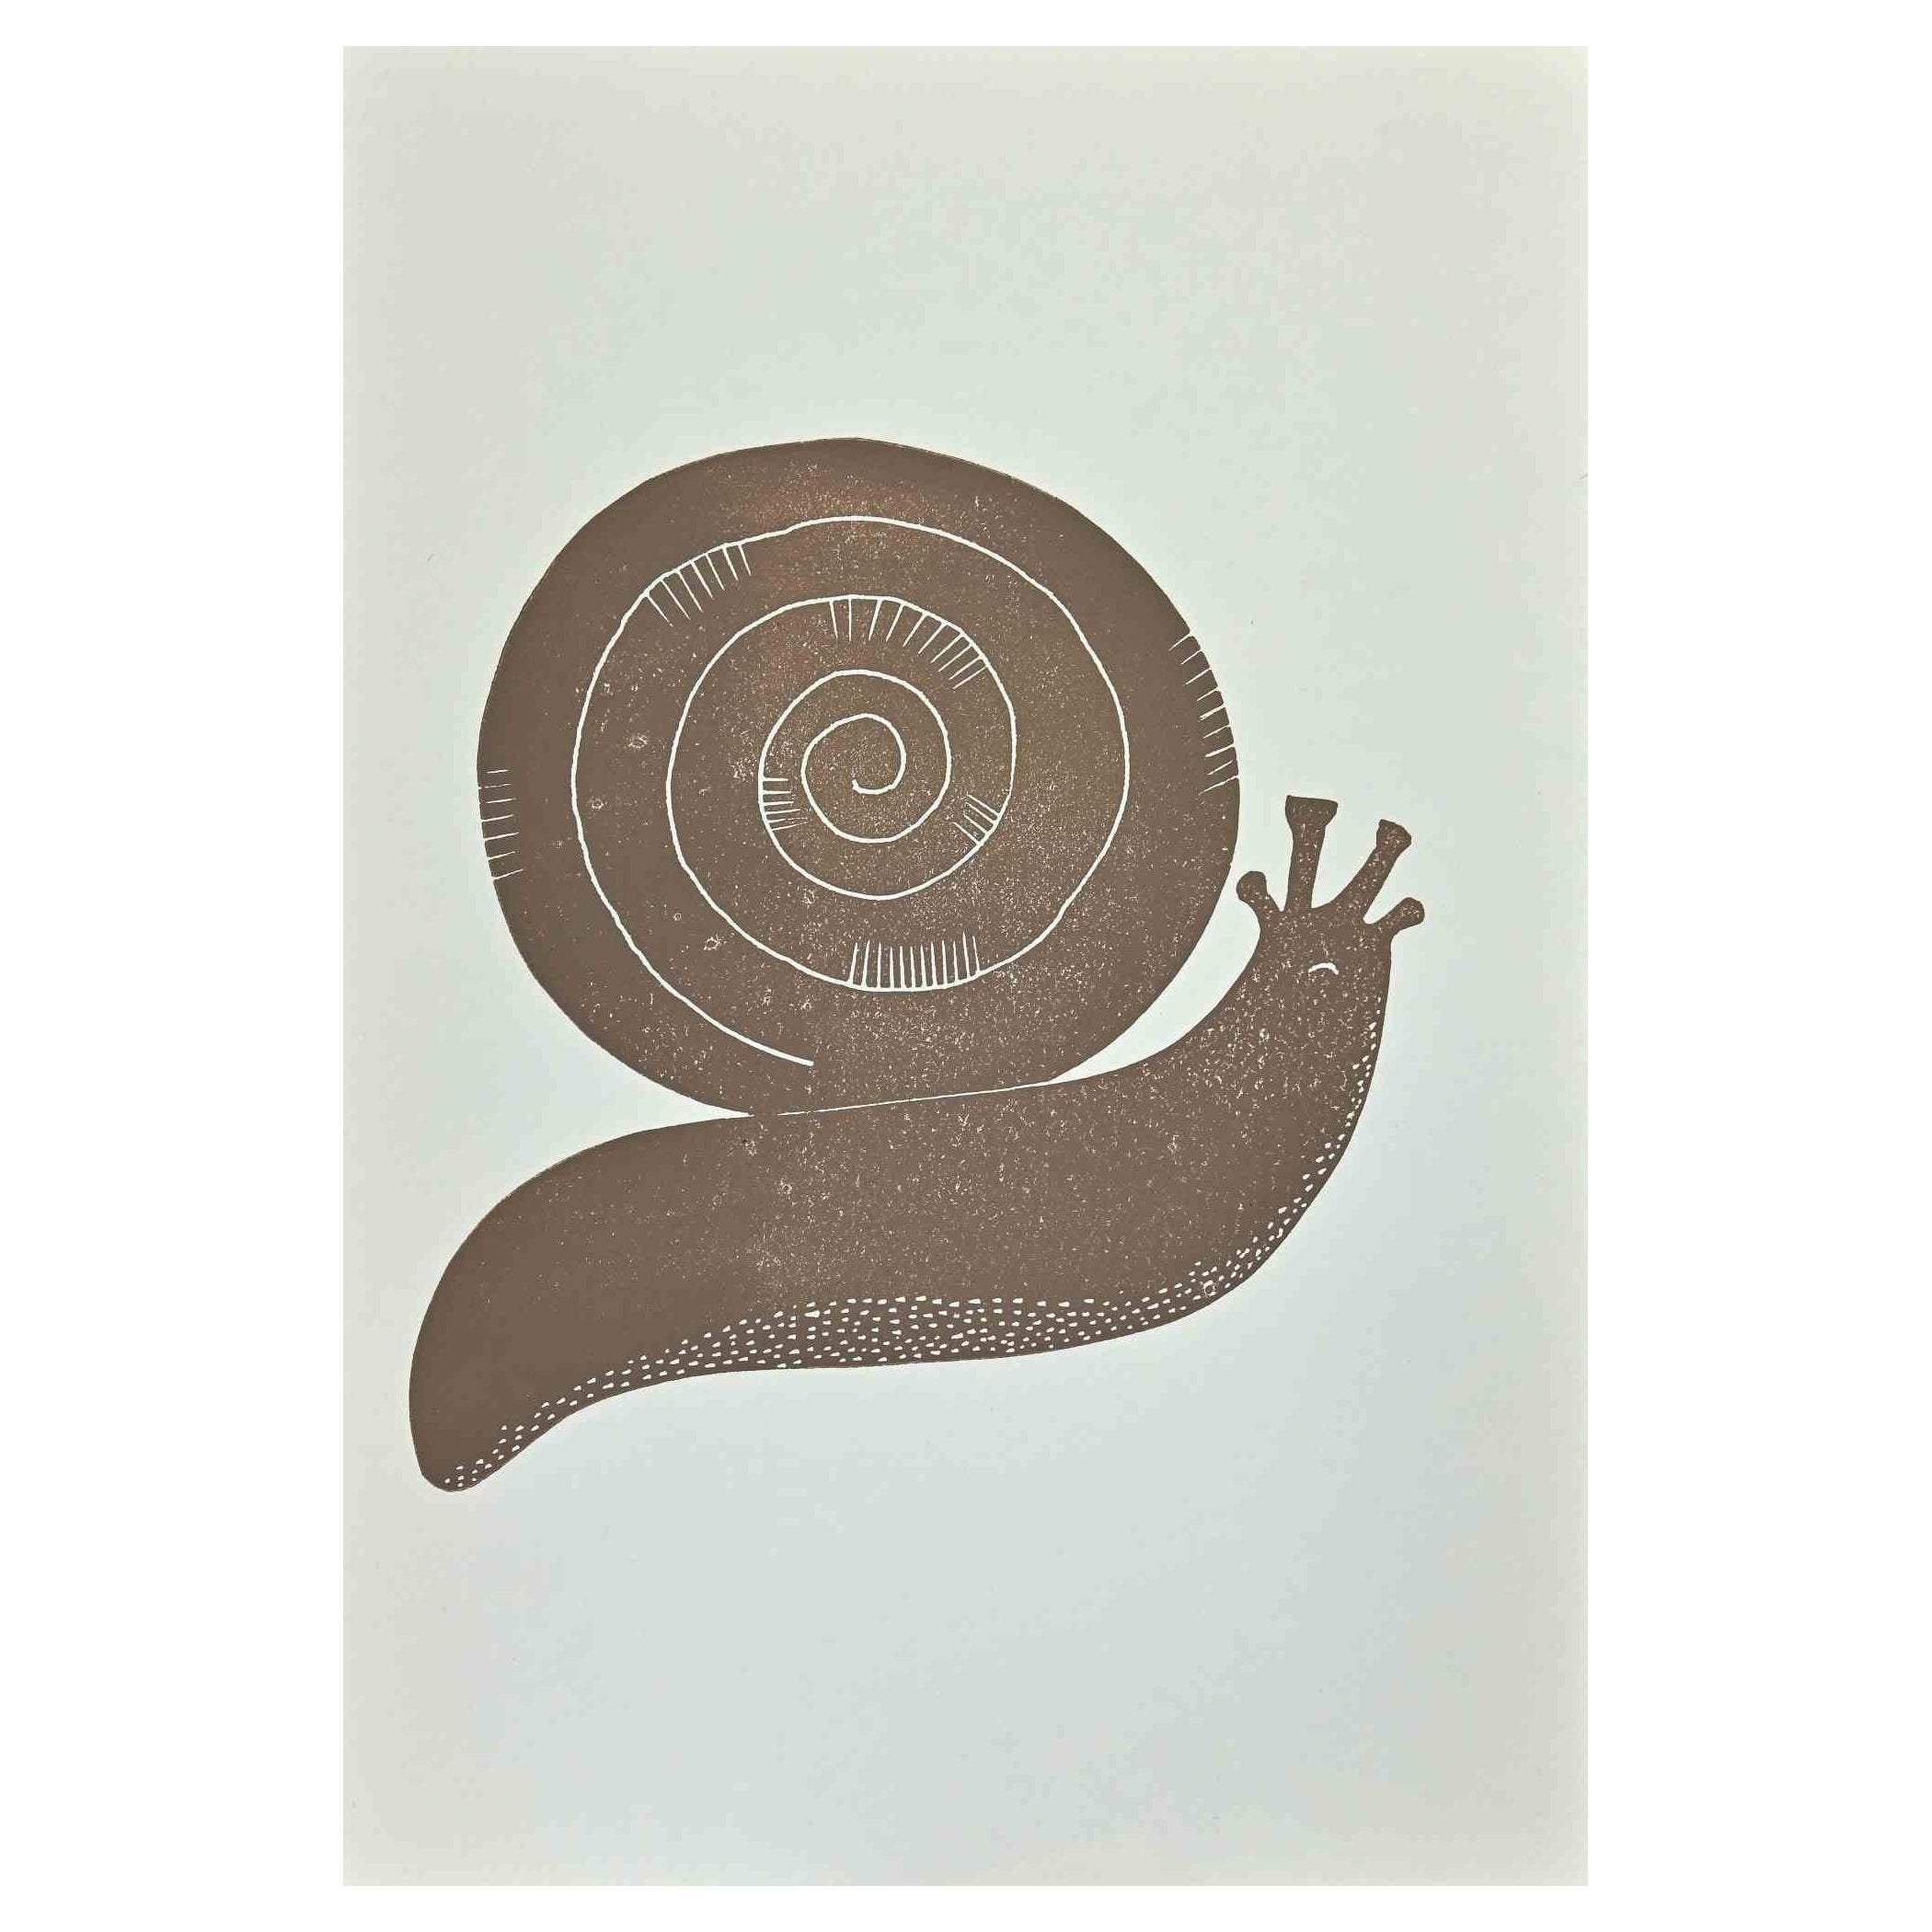 Jean Lurcat Abstract Print - Snail - Original Lithograph by Jean Lurçat - Mid 20th Century